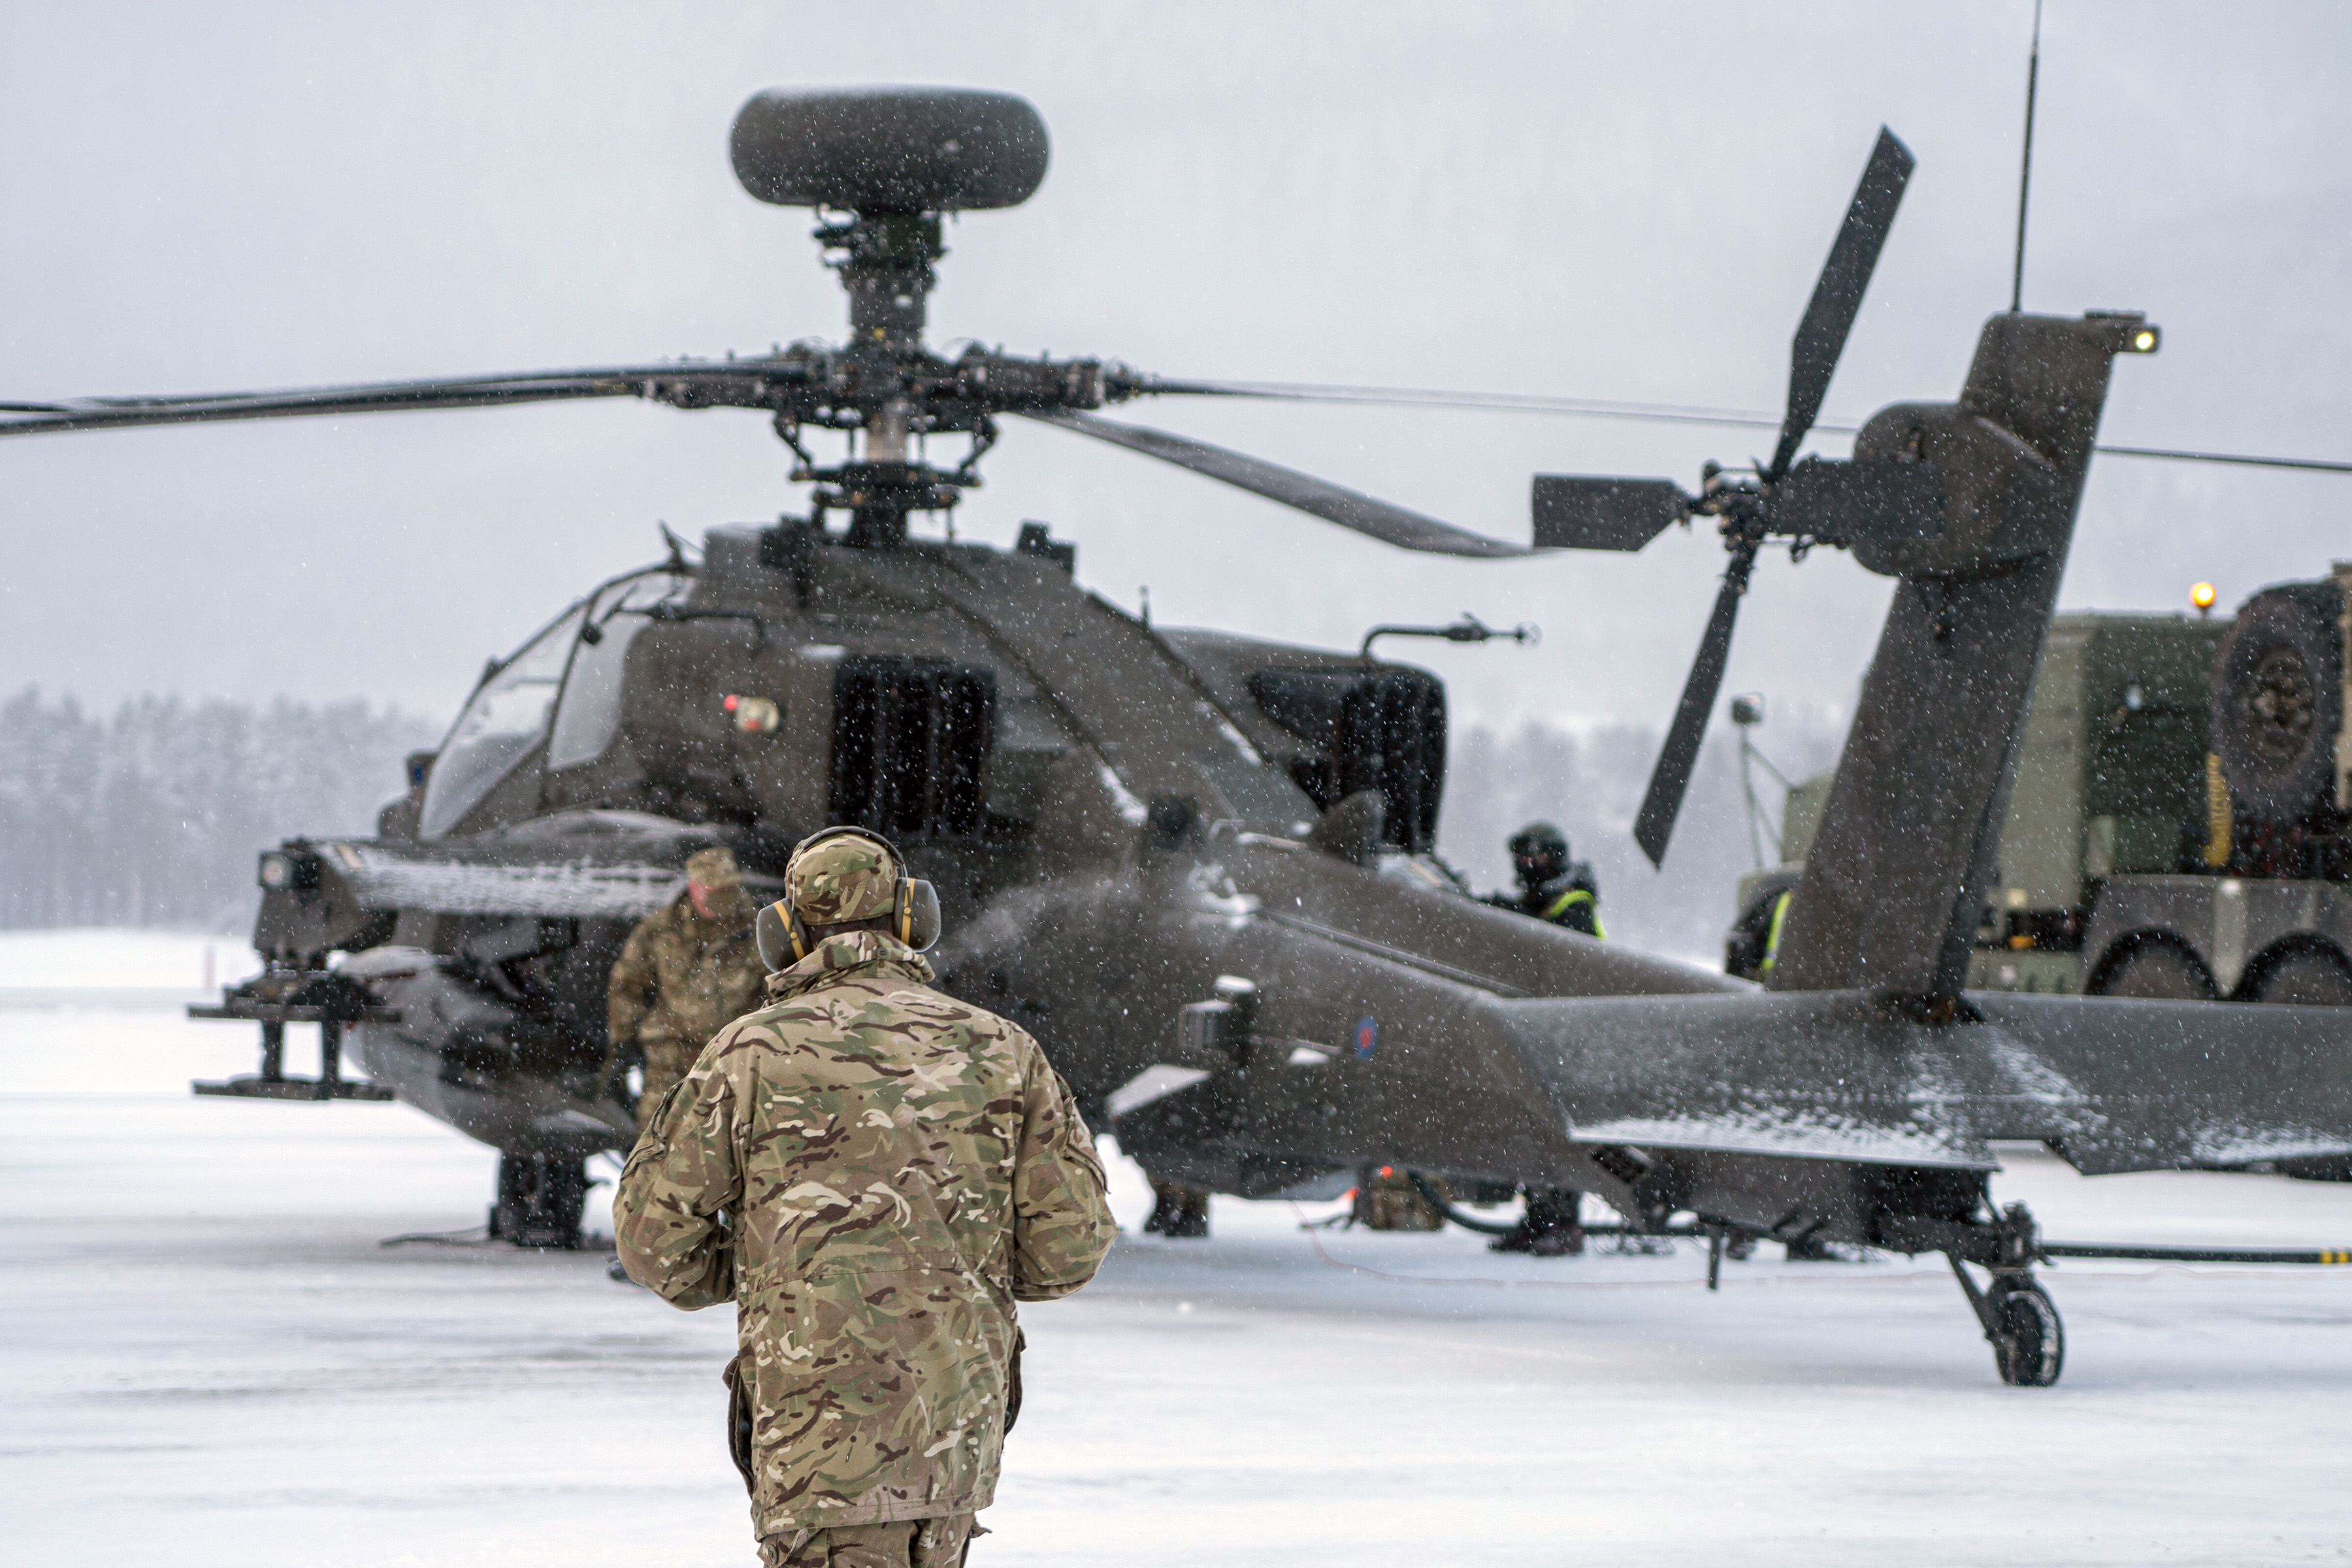 British Army Apache Attack Helicopters Tested in Arctic Circle